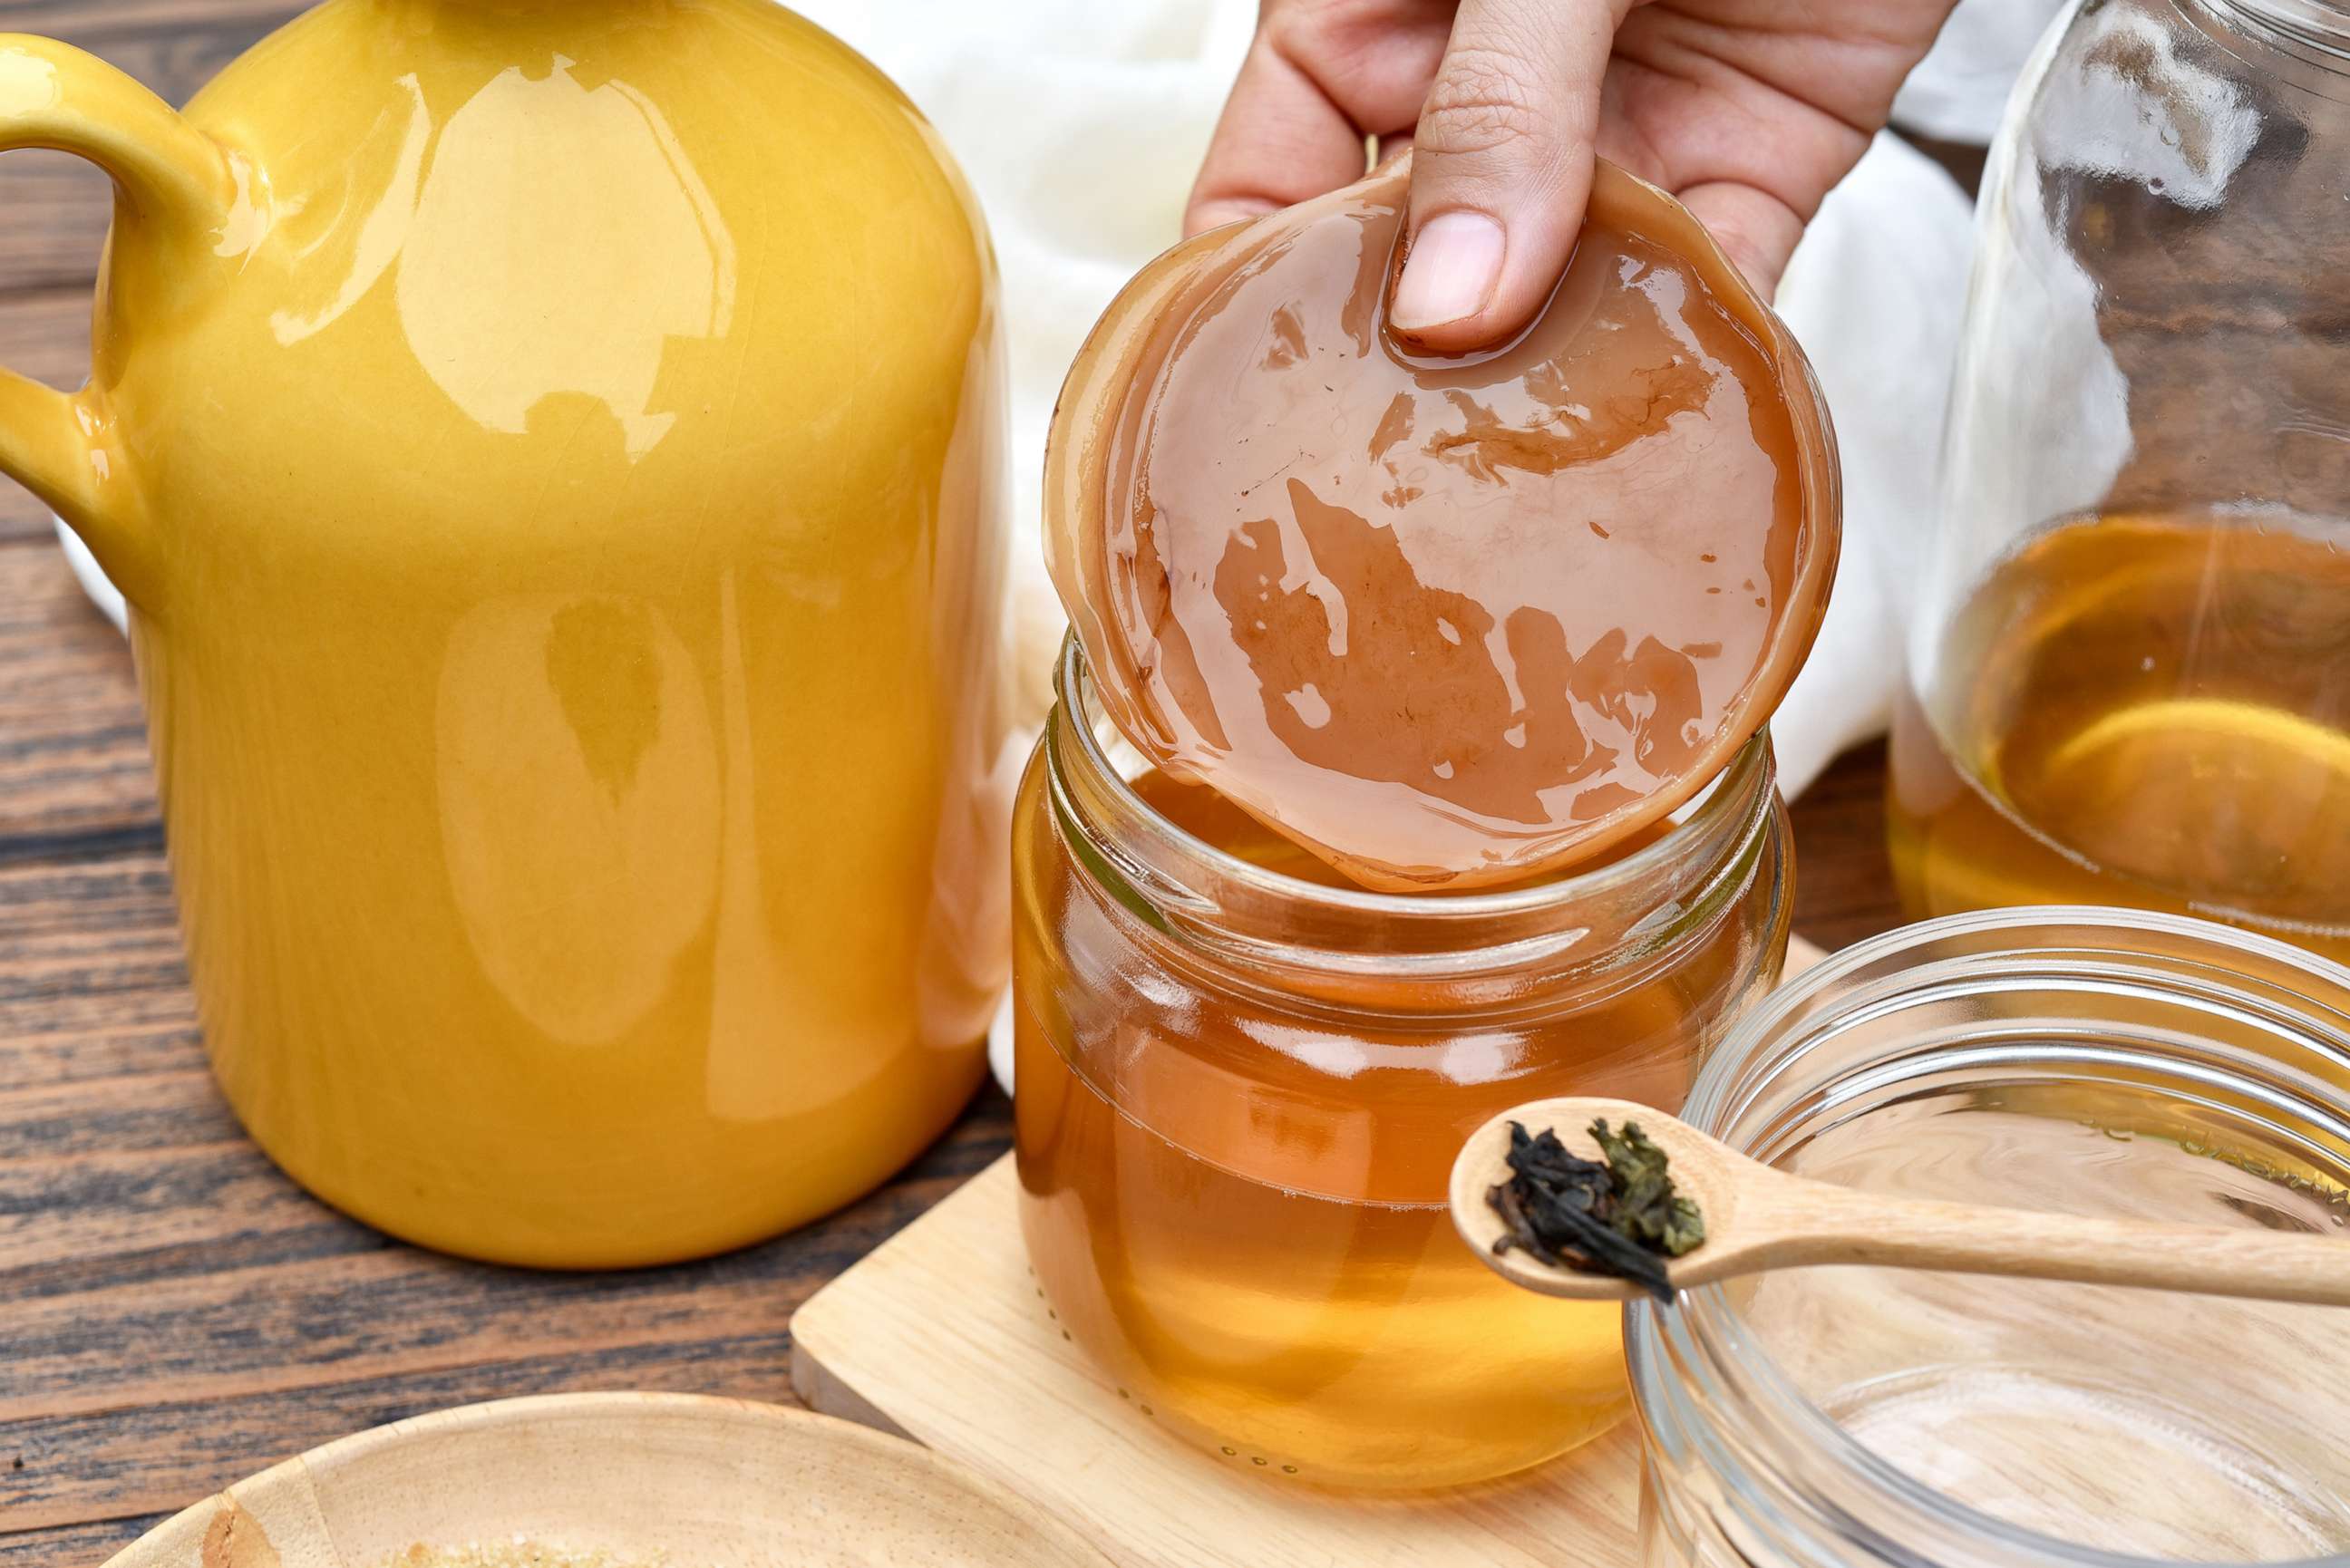 PHOTO: A kombucha tea "SCOBY" is a symbiotic colony of bacteria and yeast.